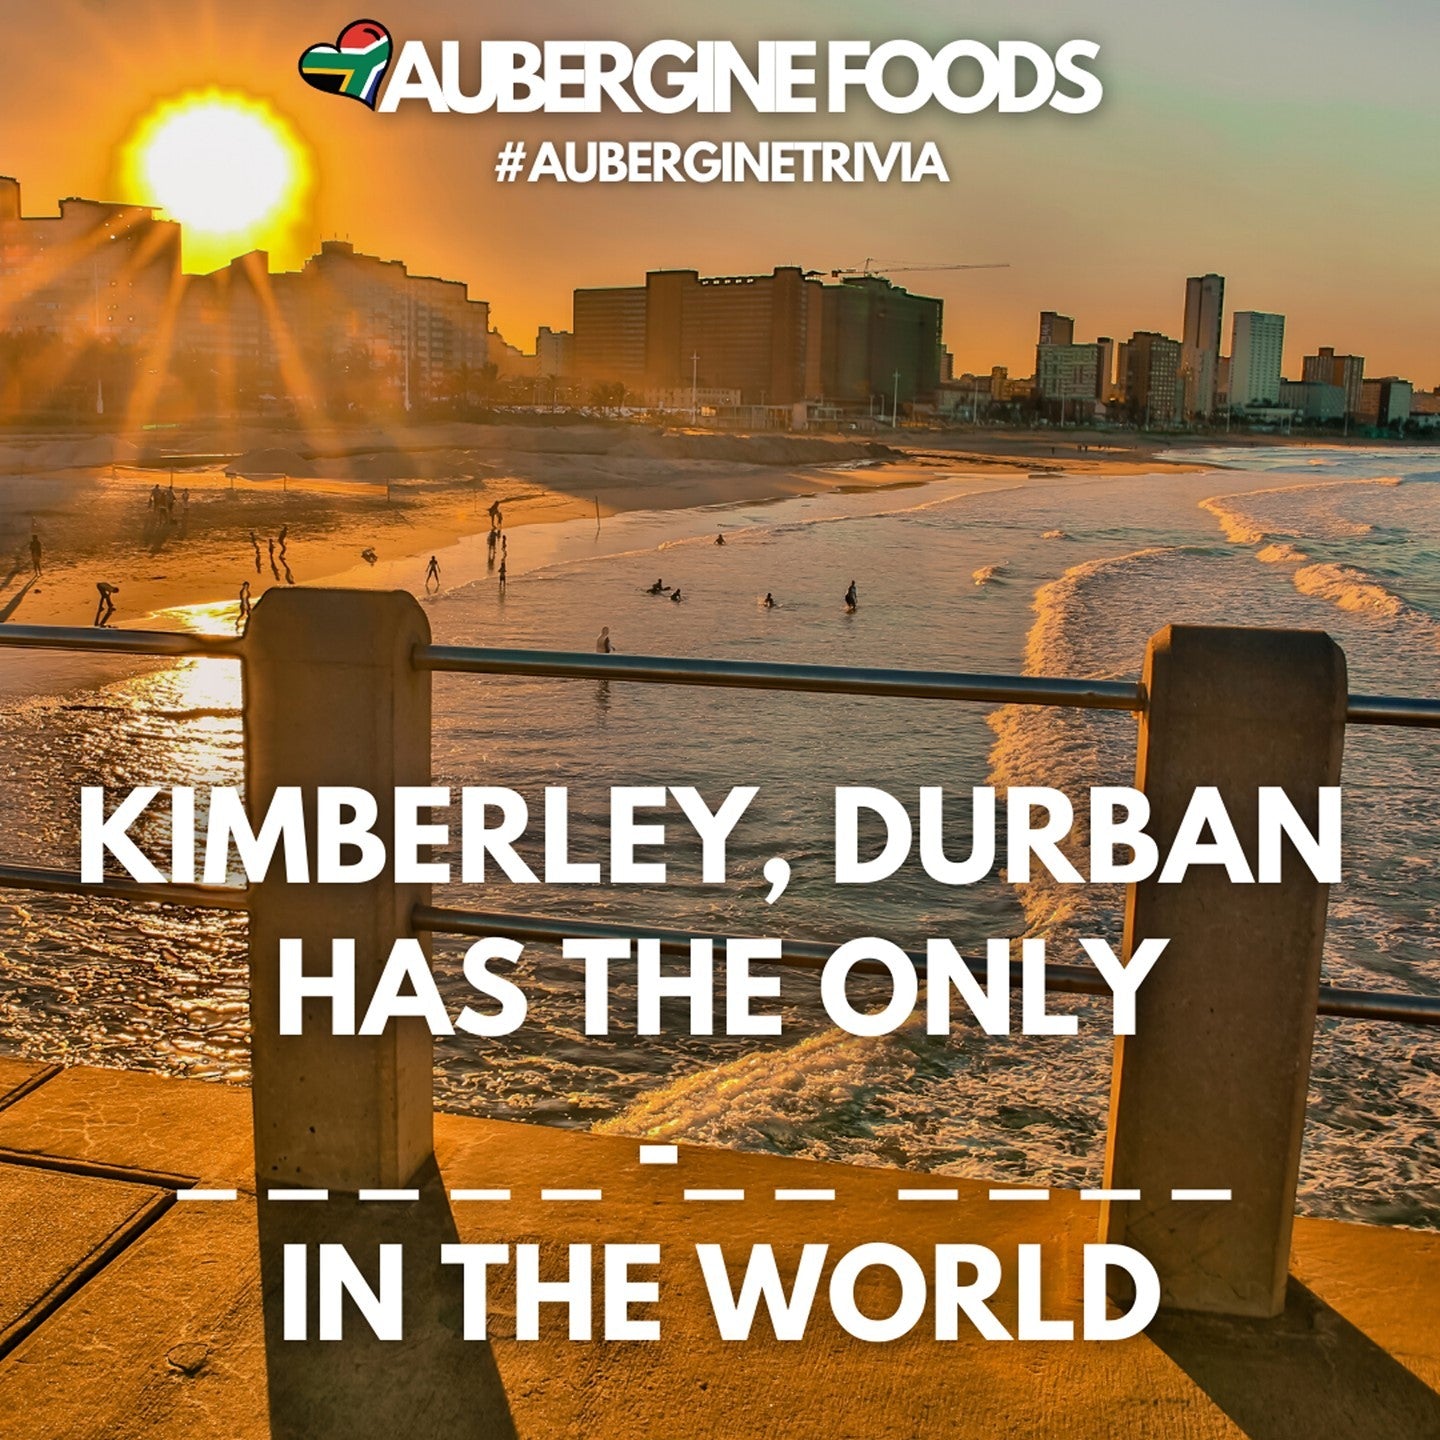 Kimberley, Durban, has the only...